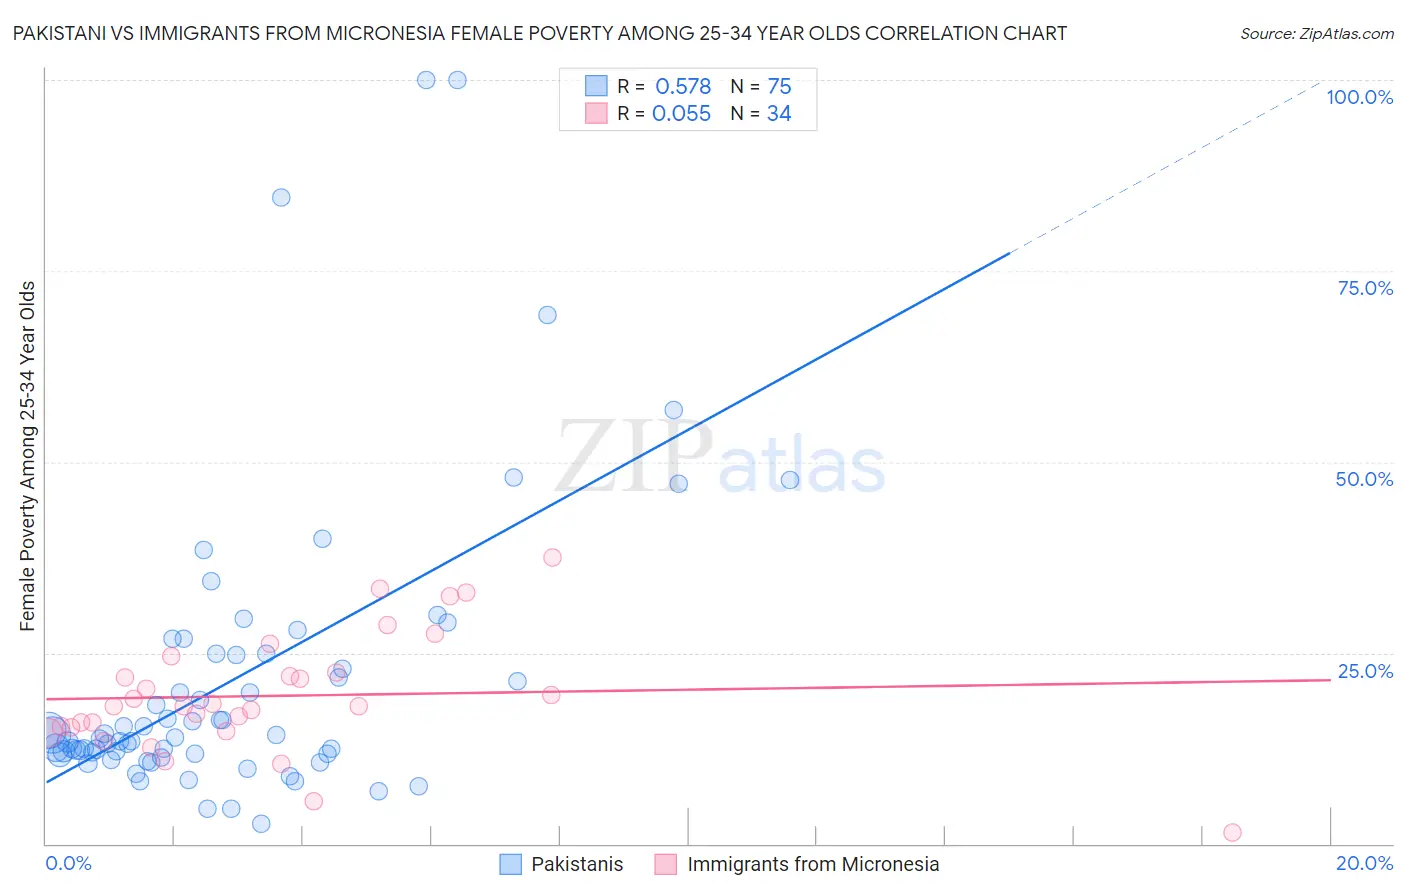 Pakistani vs Immigrants from Micronesia Female Poverty Among 25-34 Year Olds